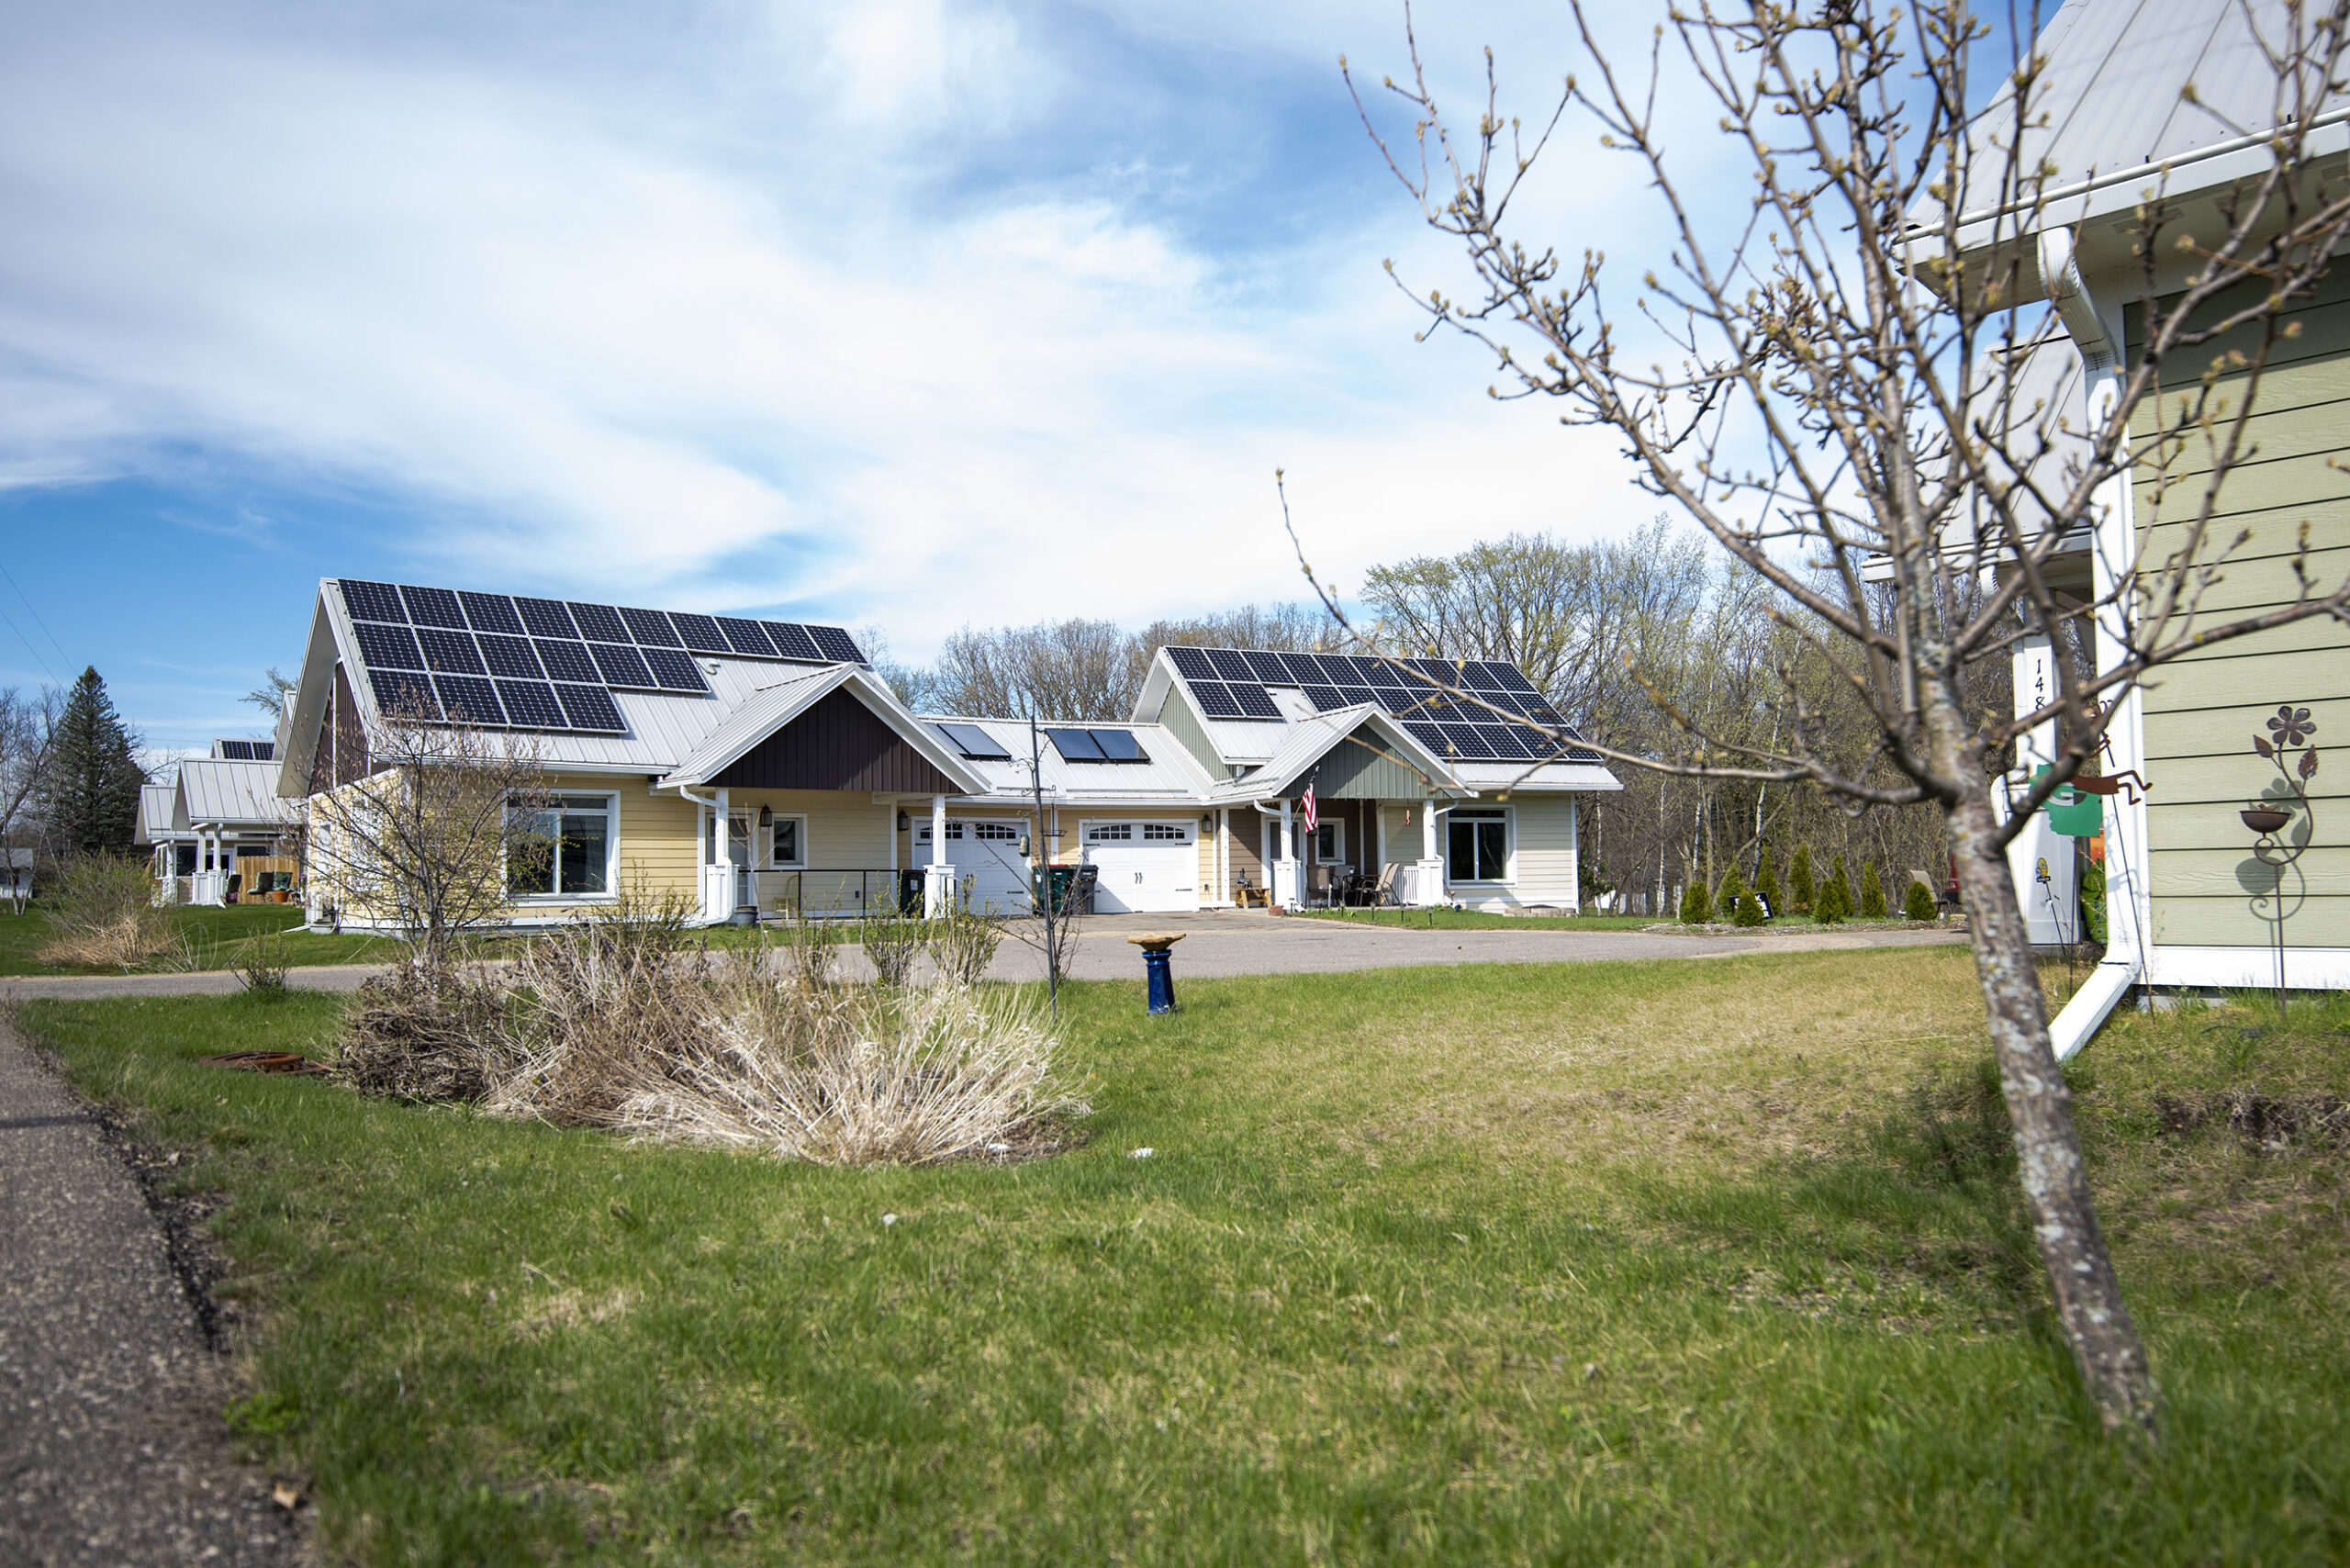 Public Service Commission rejects utility’s proposed changes to residential solar reimbursement